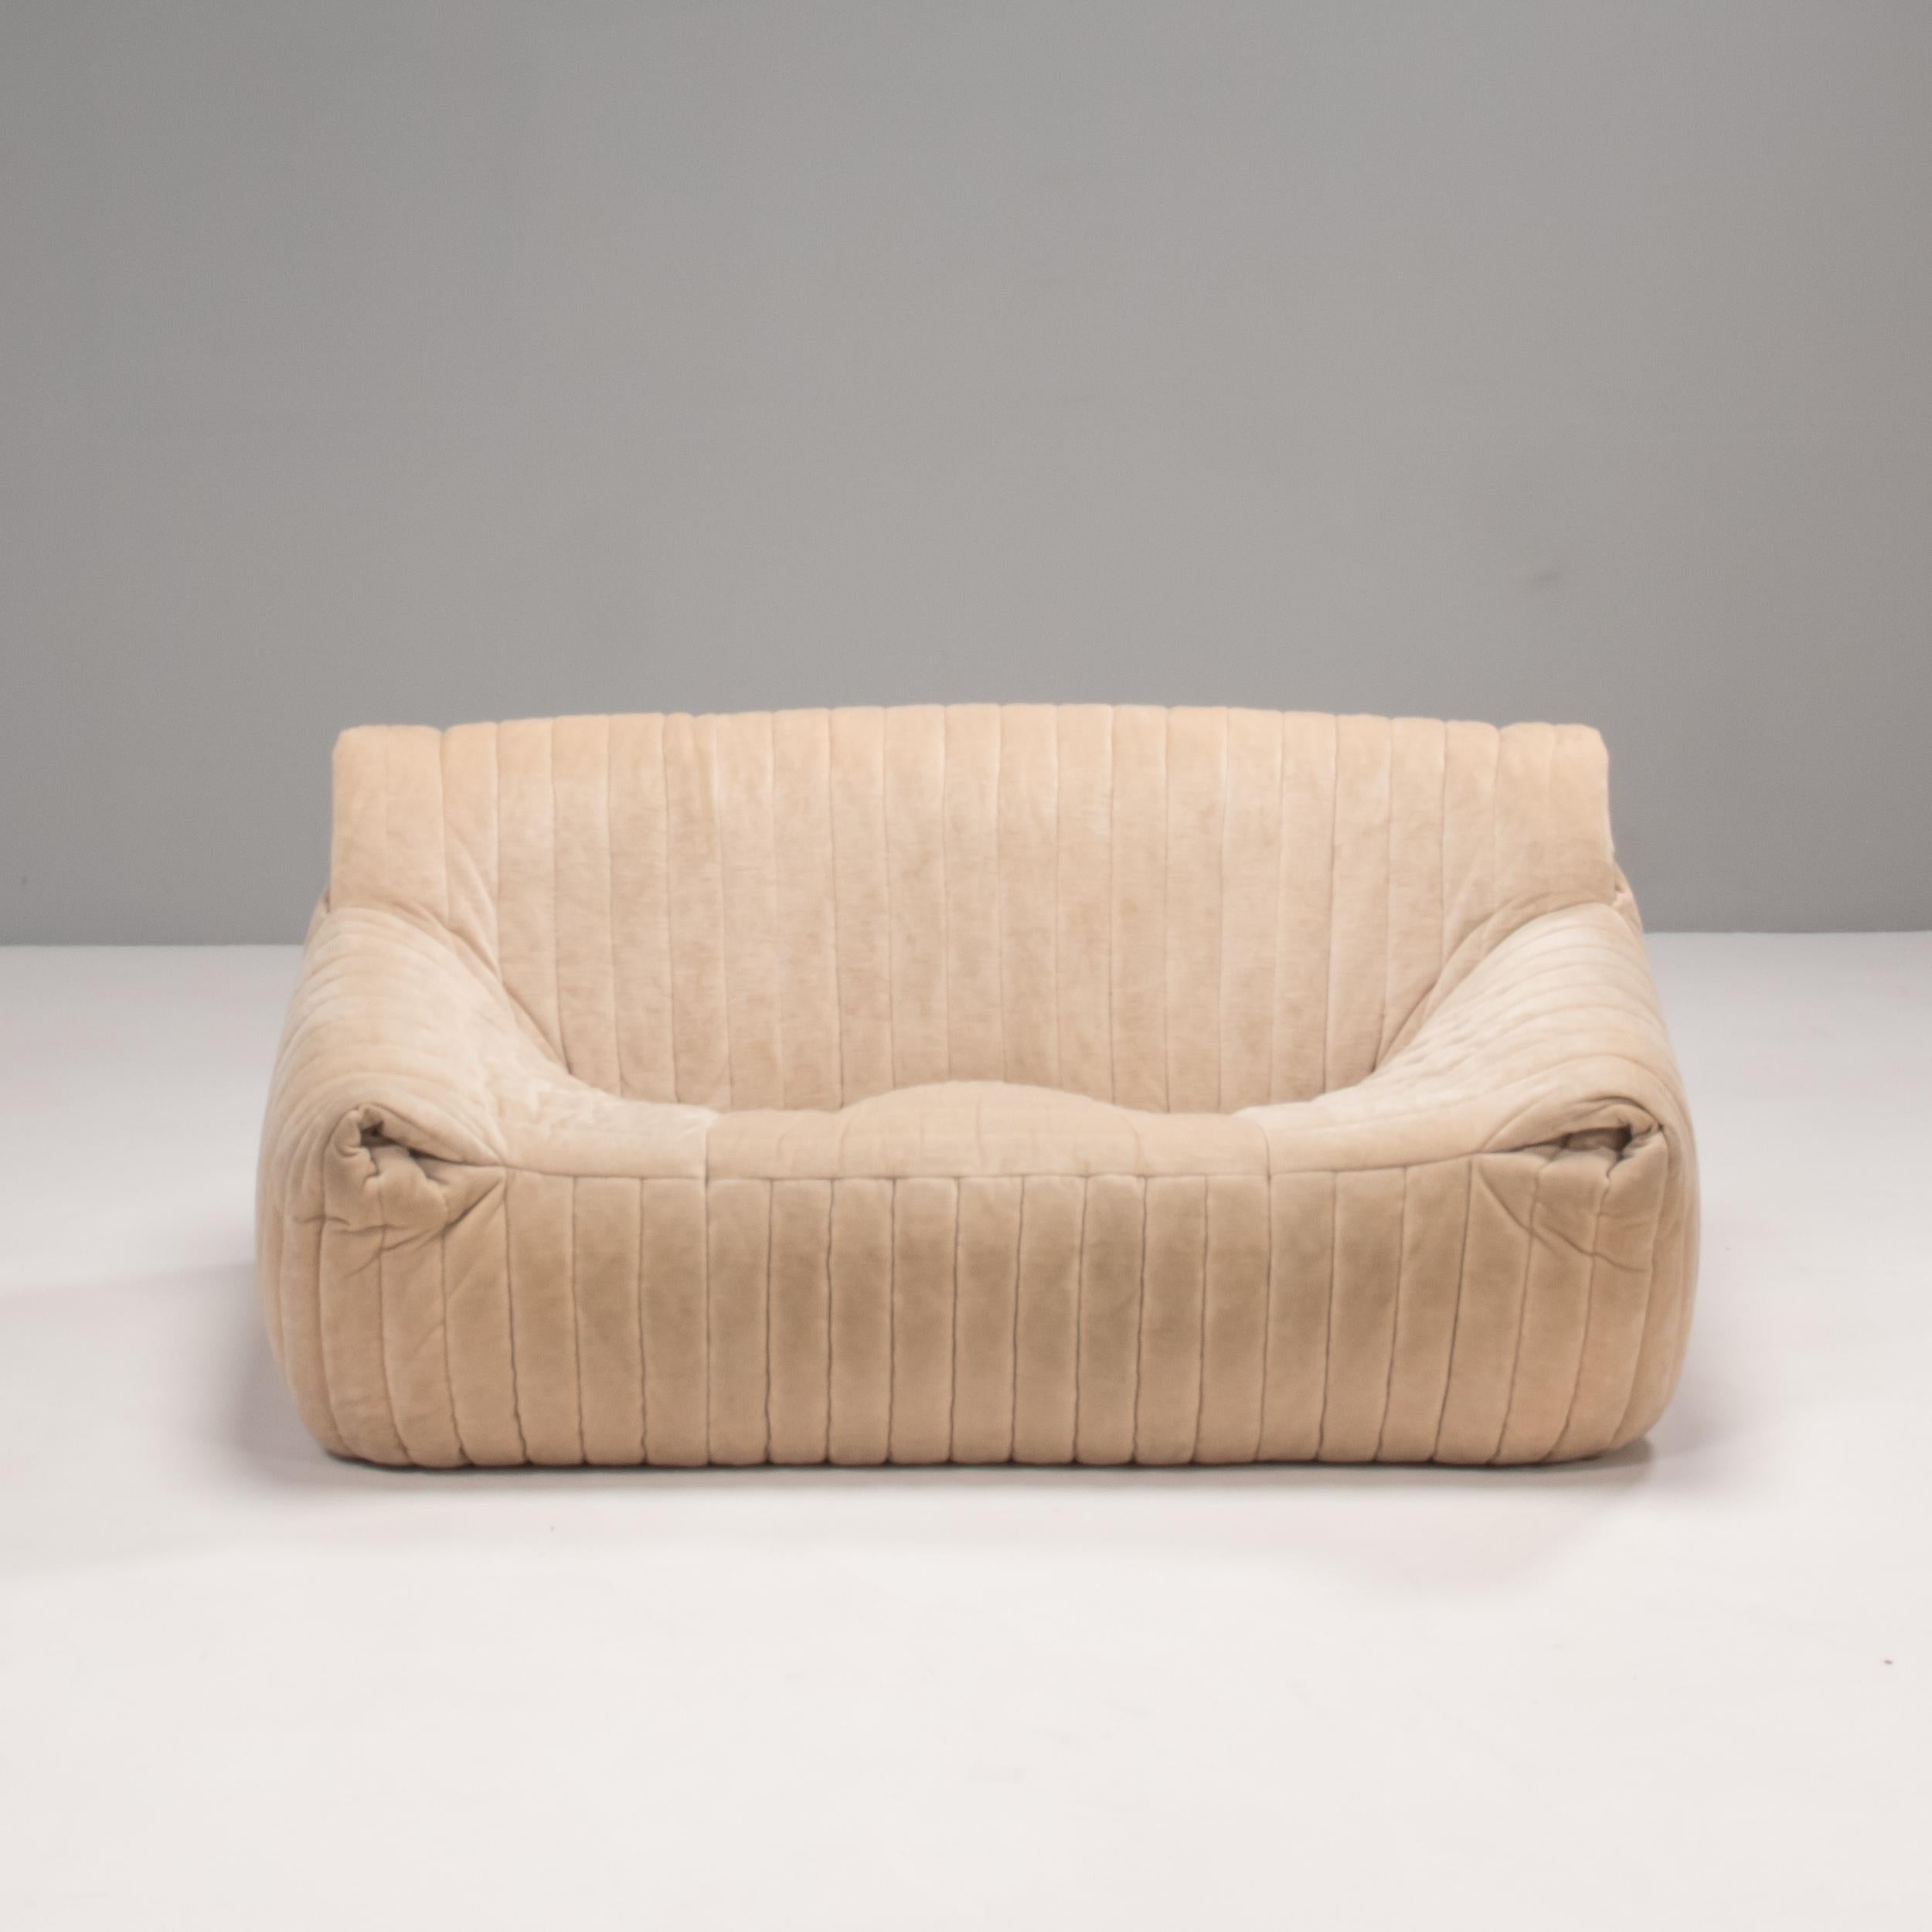 An iconic 1970s design, the Sandra sofa was designed by Annie Hiéronimus for Cinna after she joined the Roset Bureau d'Etudes in 1976.

Constructed from foam, the sofa has a solid form which is fully upholstered in light biscuit beige ribbed